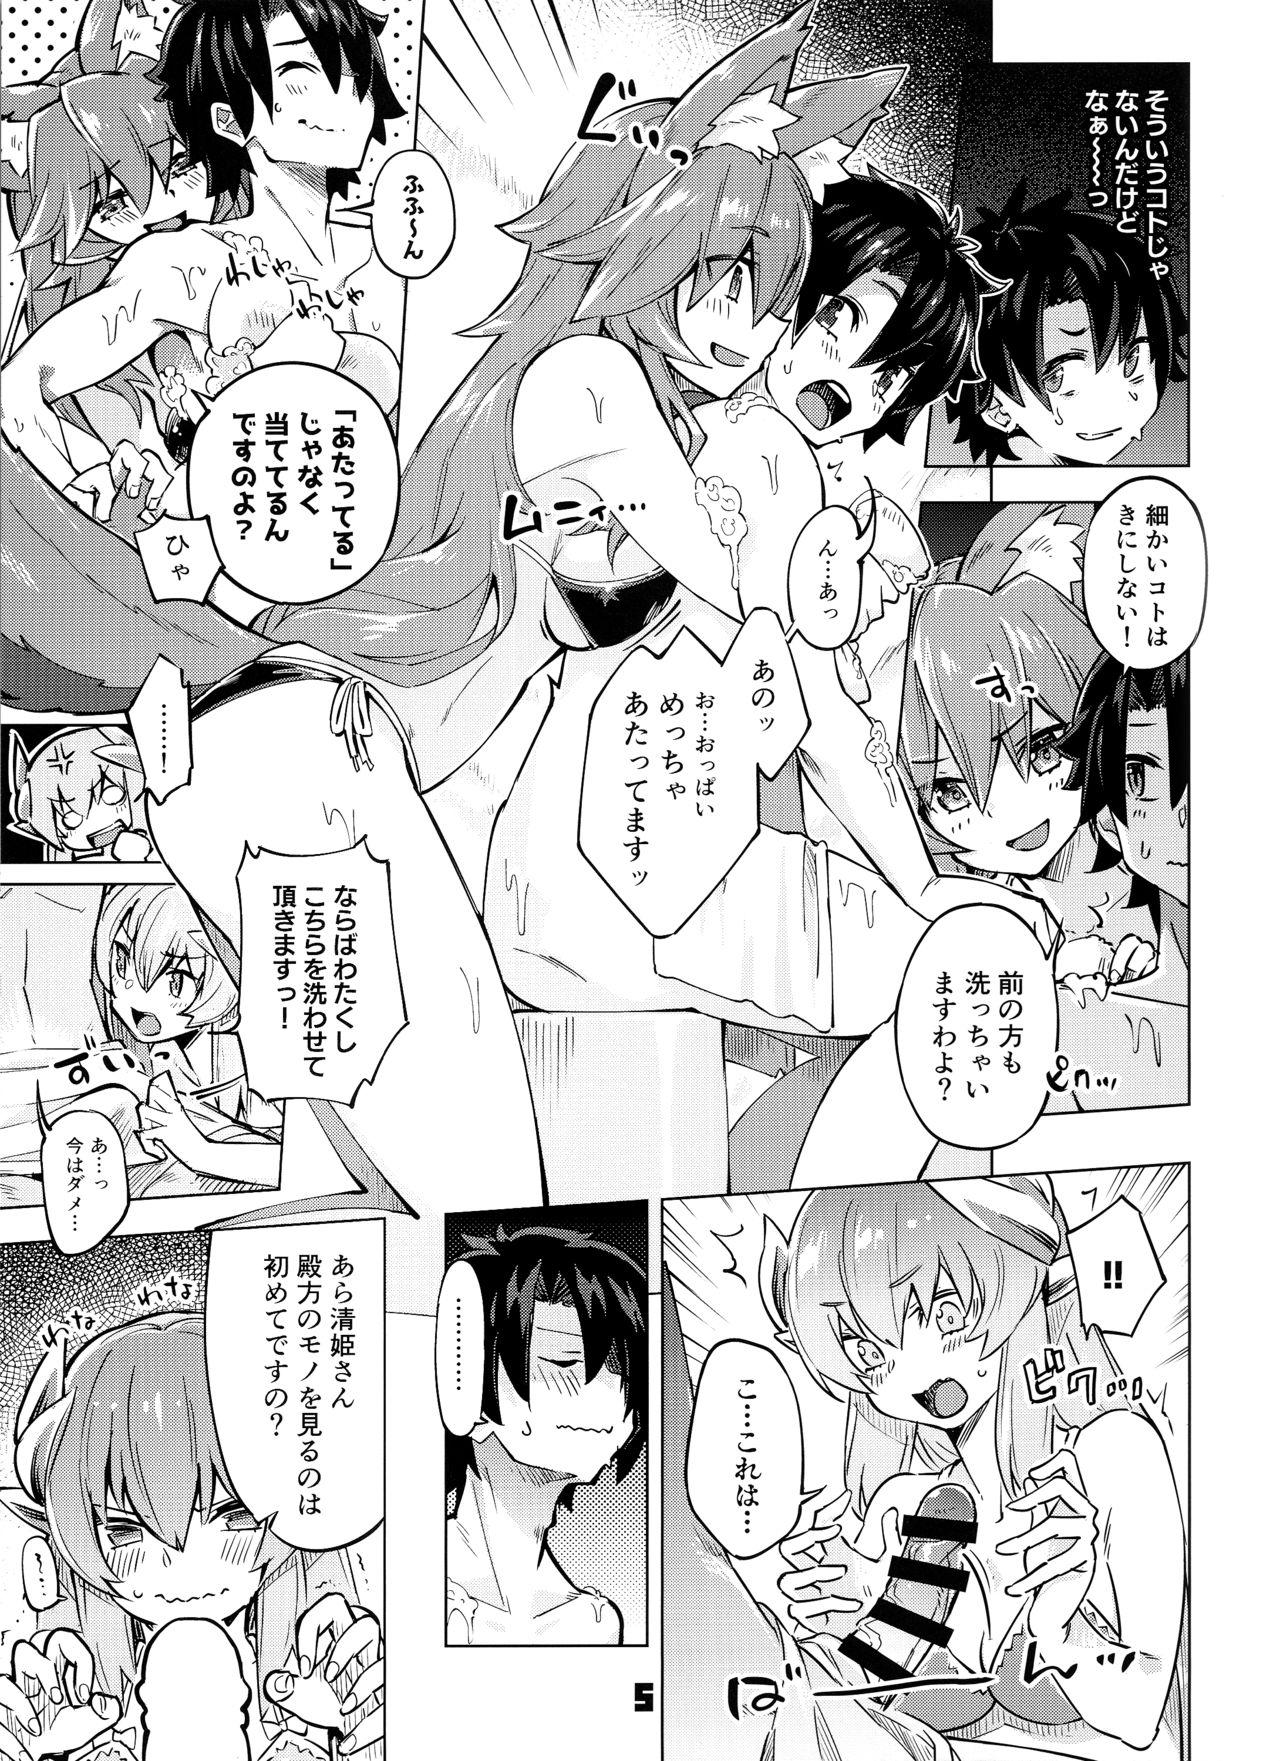 Good Sex Shinai to Derarenai My Room 2 - My room can not go out - Fate grand order Passivo - Page 4